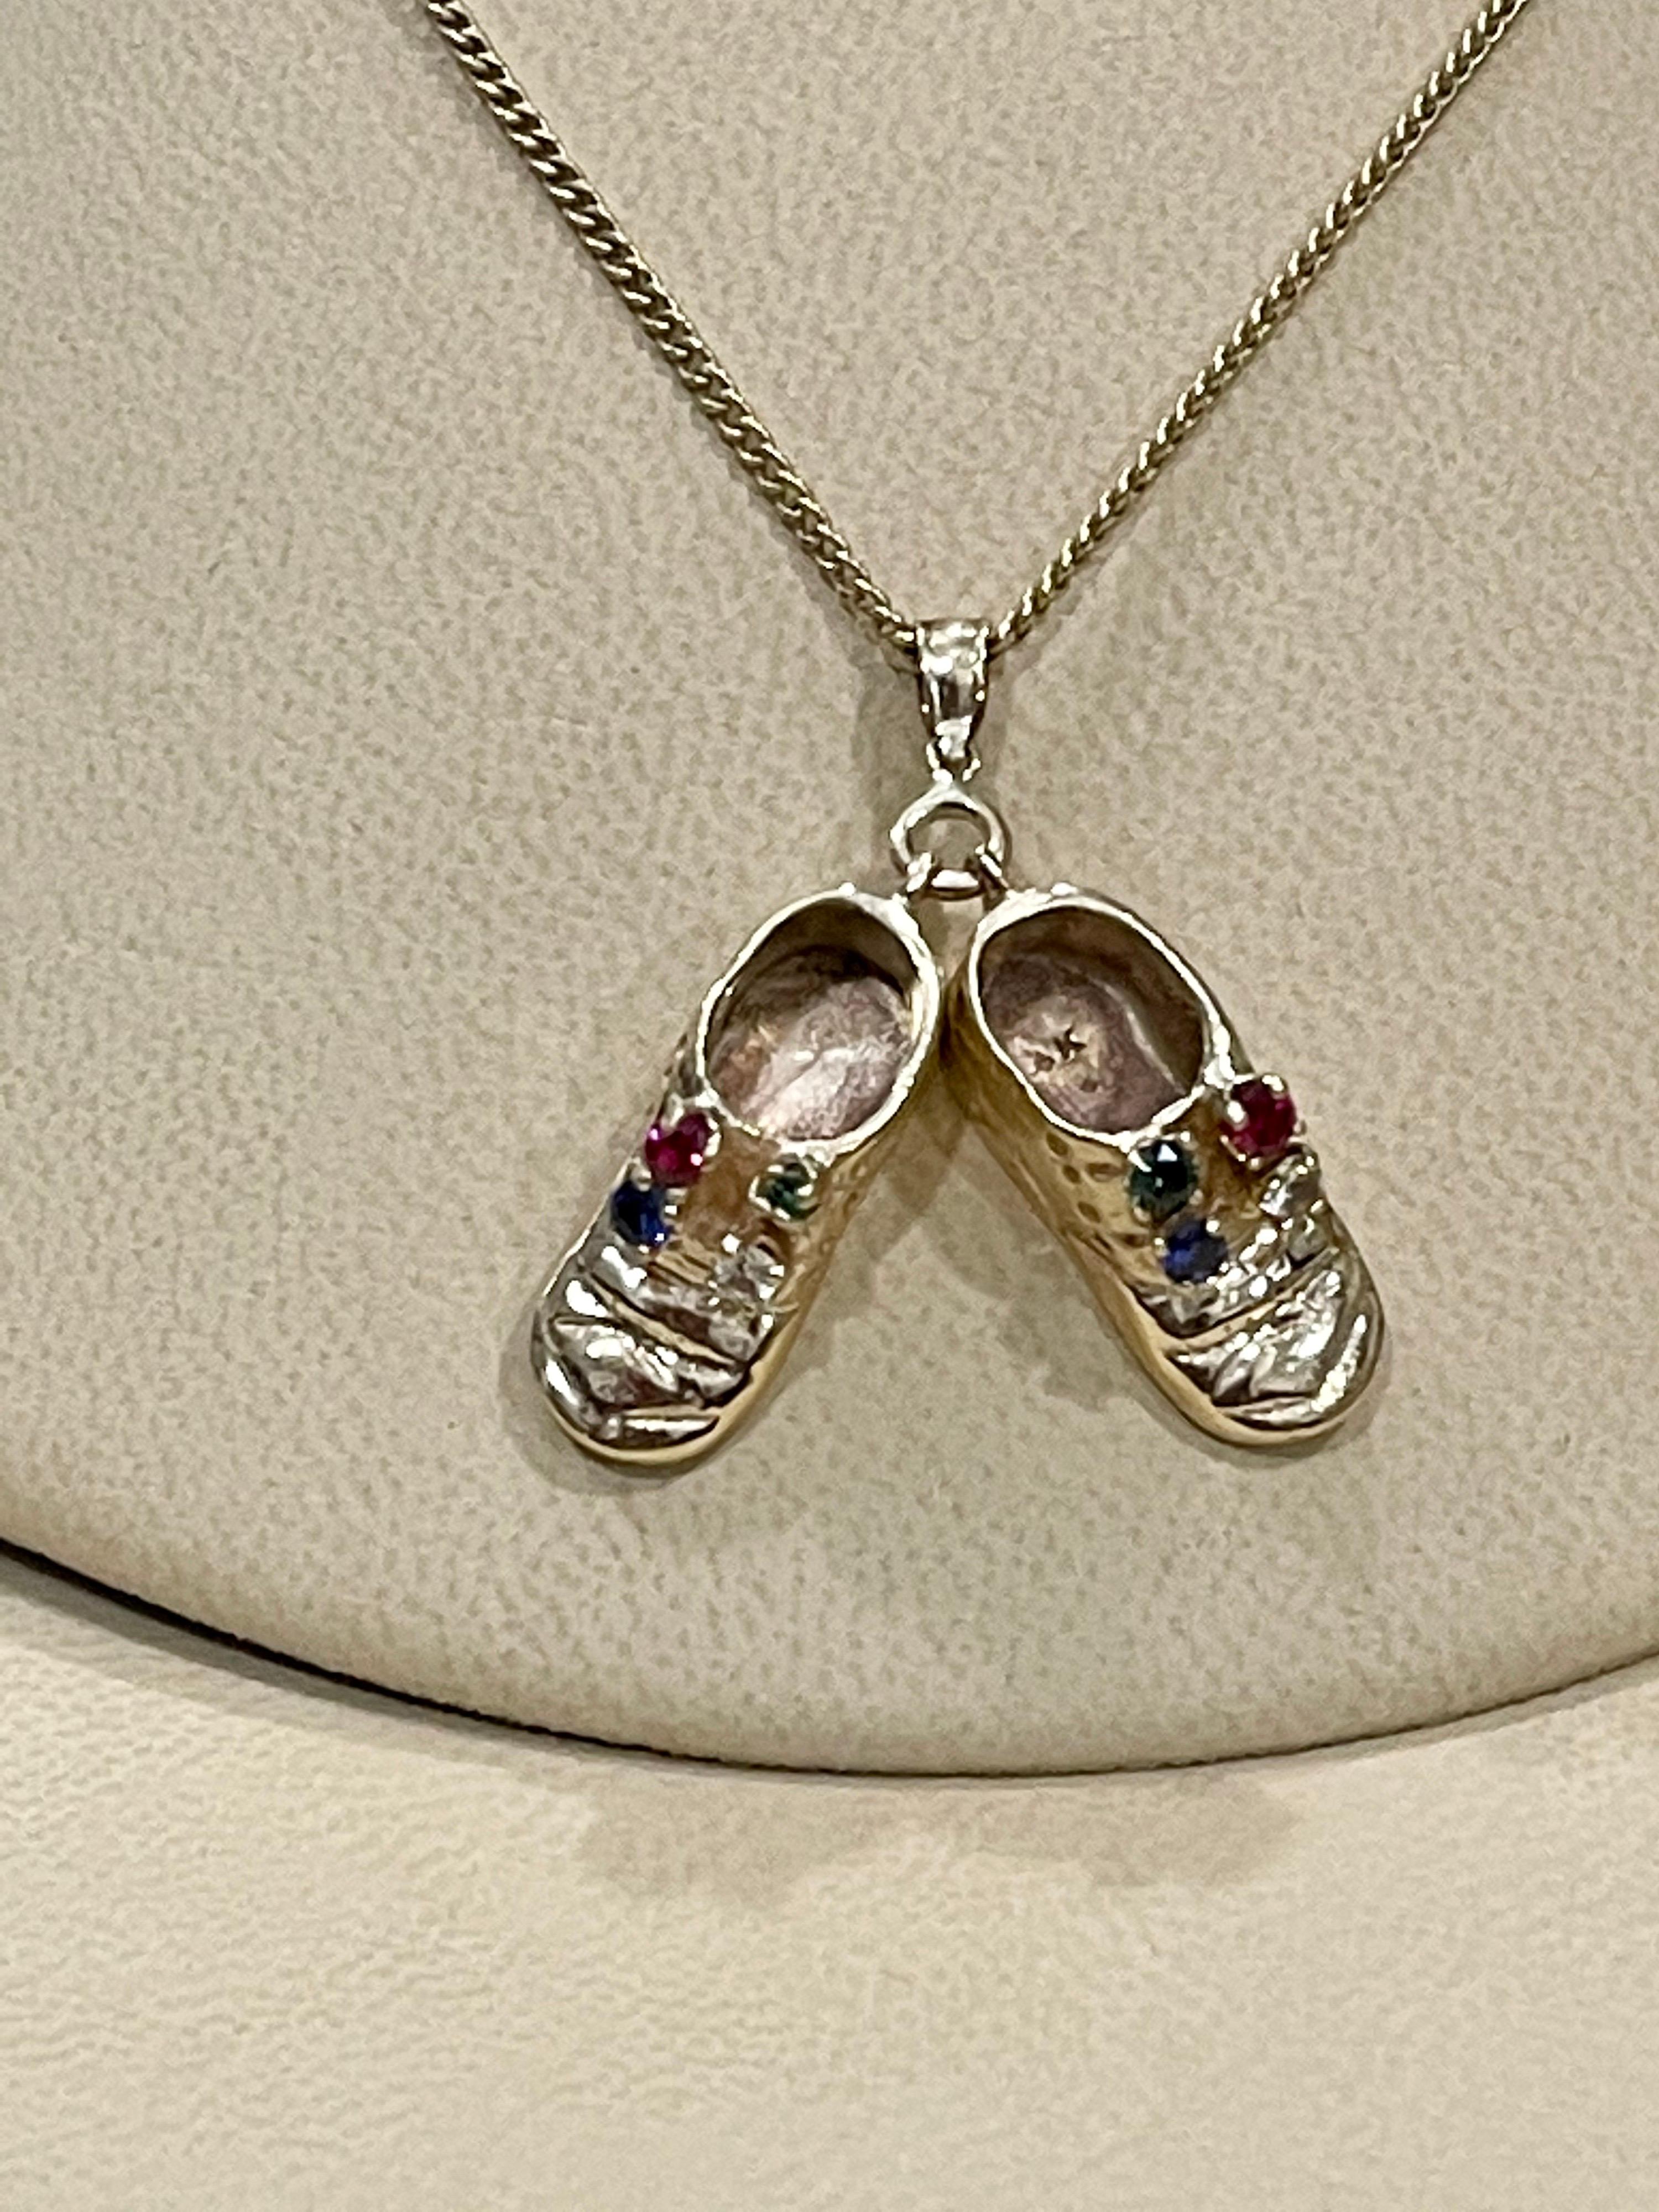 Pair of Shoe Charms with Precious Stone Pendant Necklace and Yellow Gold Chain In Excellent Condition For Sale In New York, NY